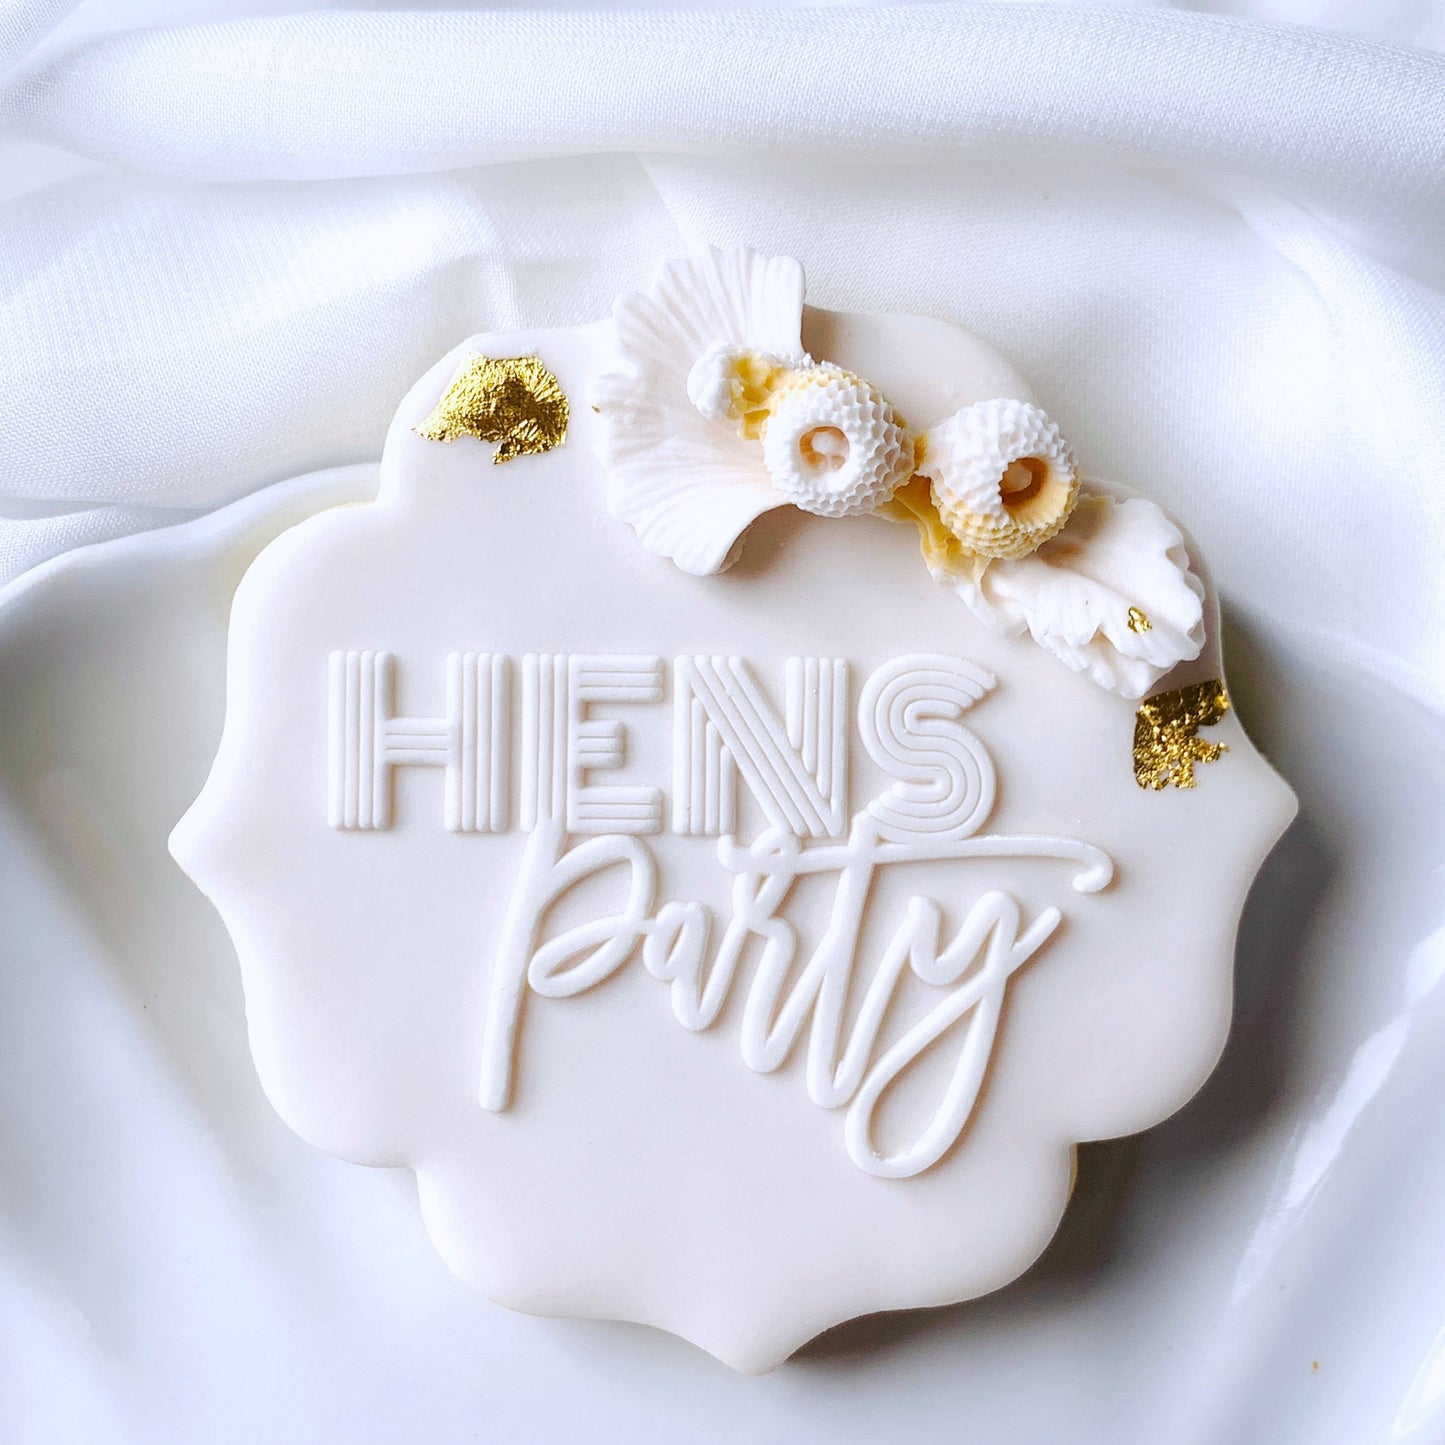 Small Hens Party Cookie Stamp